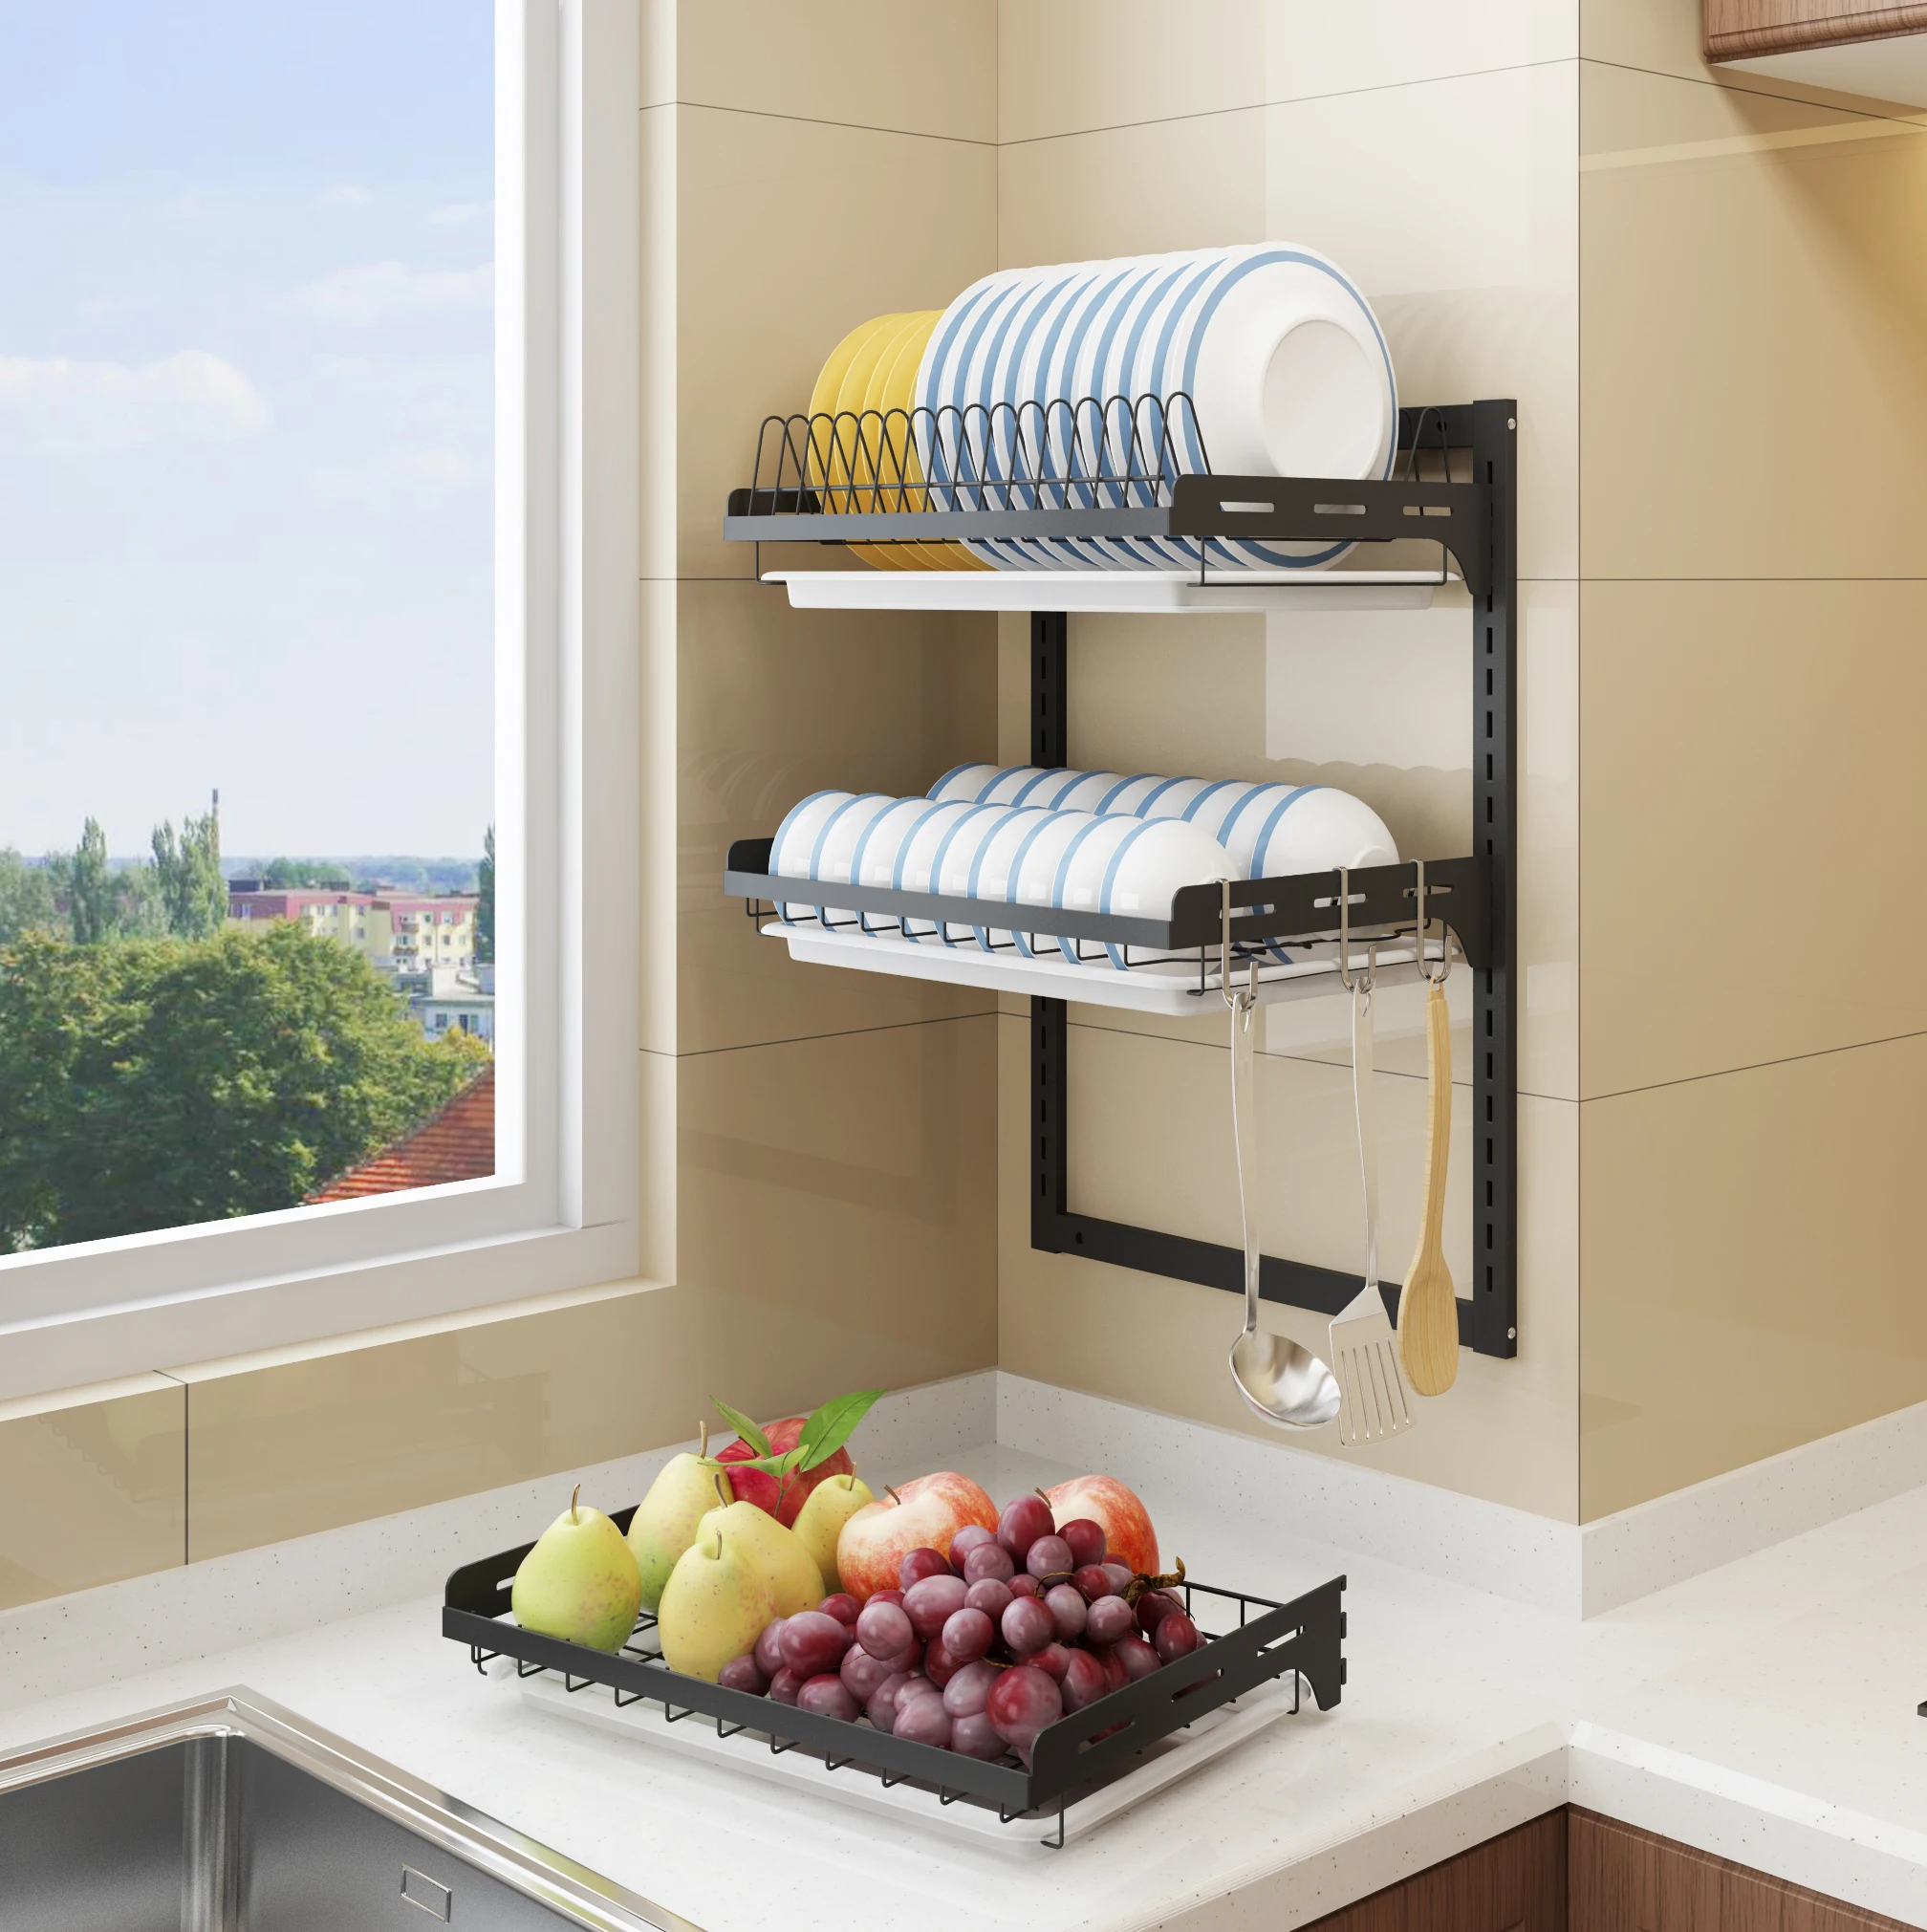 Details about   2/3 Tier Kicthen Rack Black Stainless Steel Shelf Wall Mount Plate Dish Drainer 